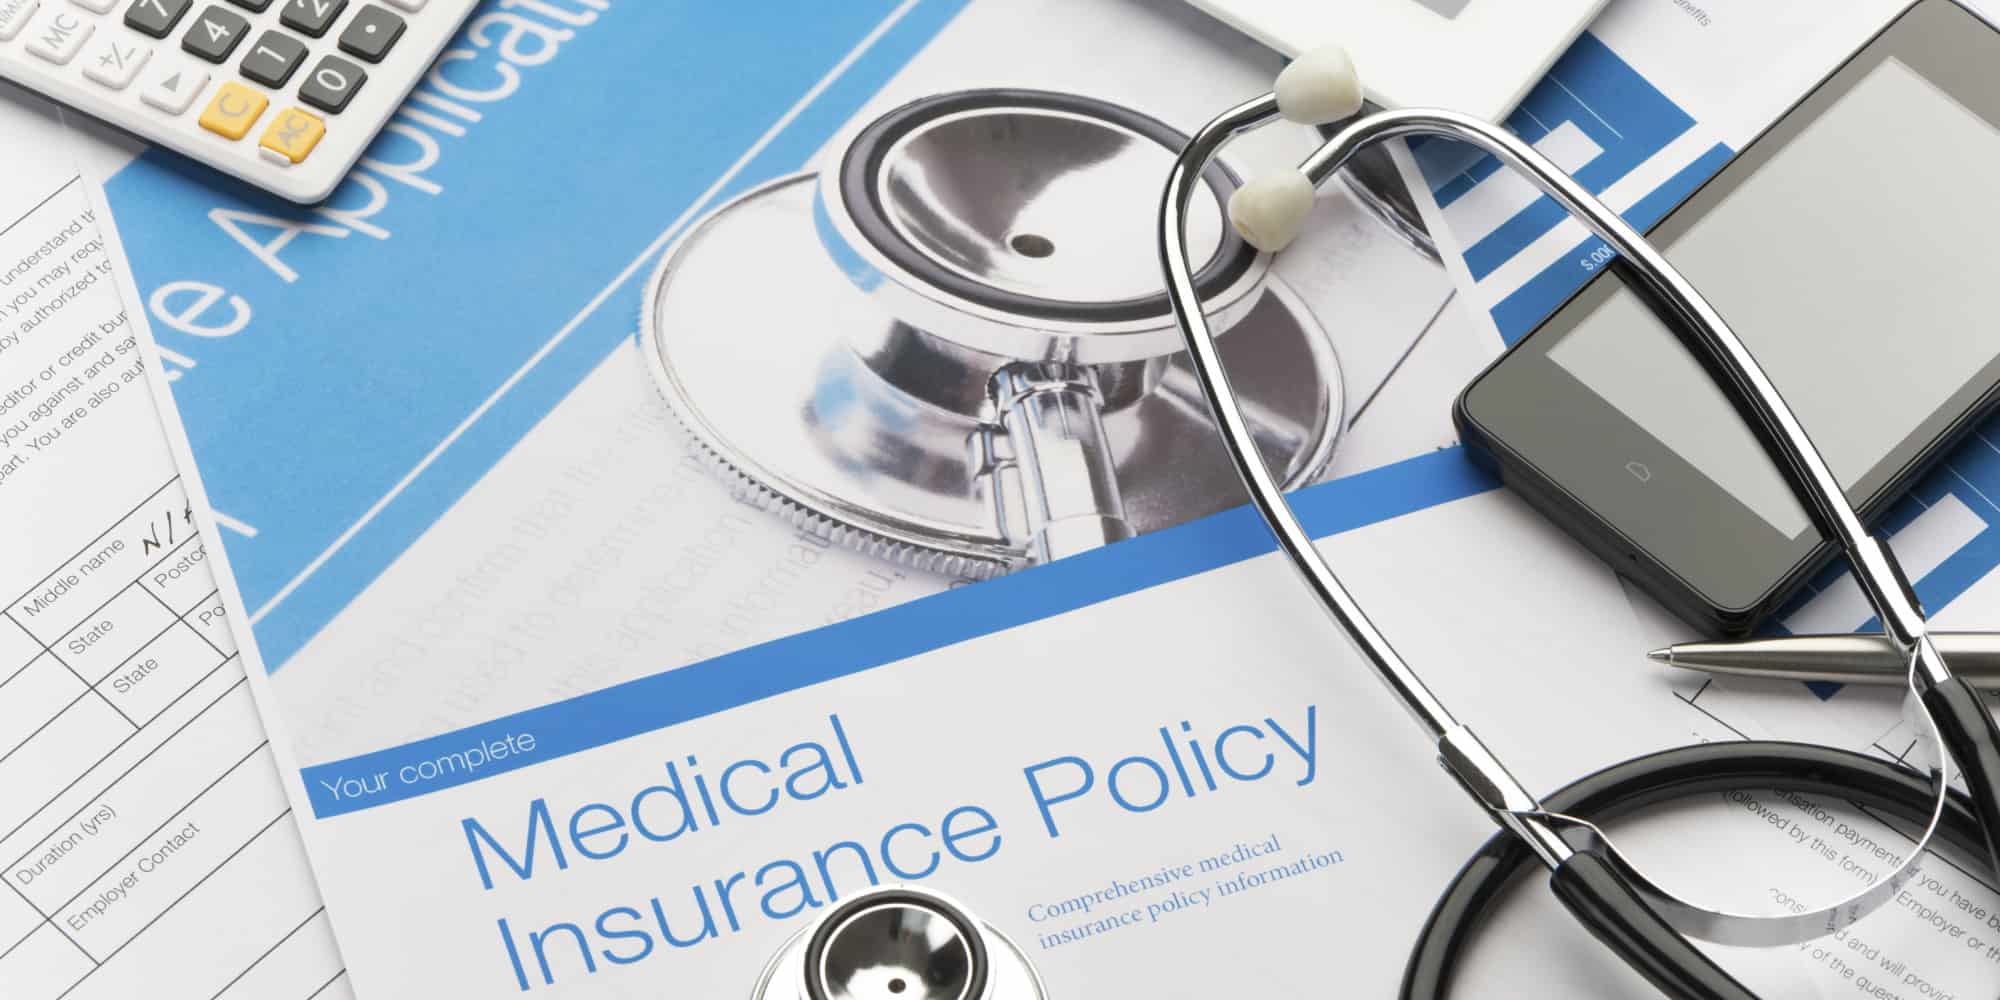 Medical insurance policy